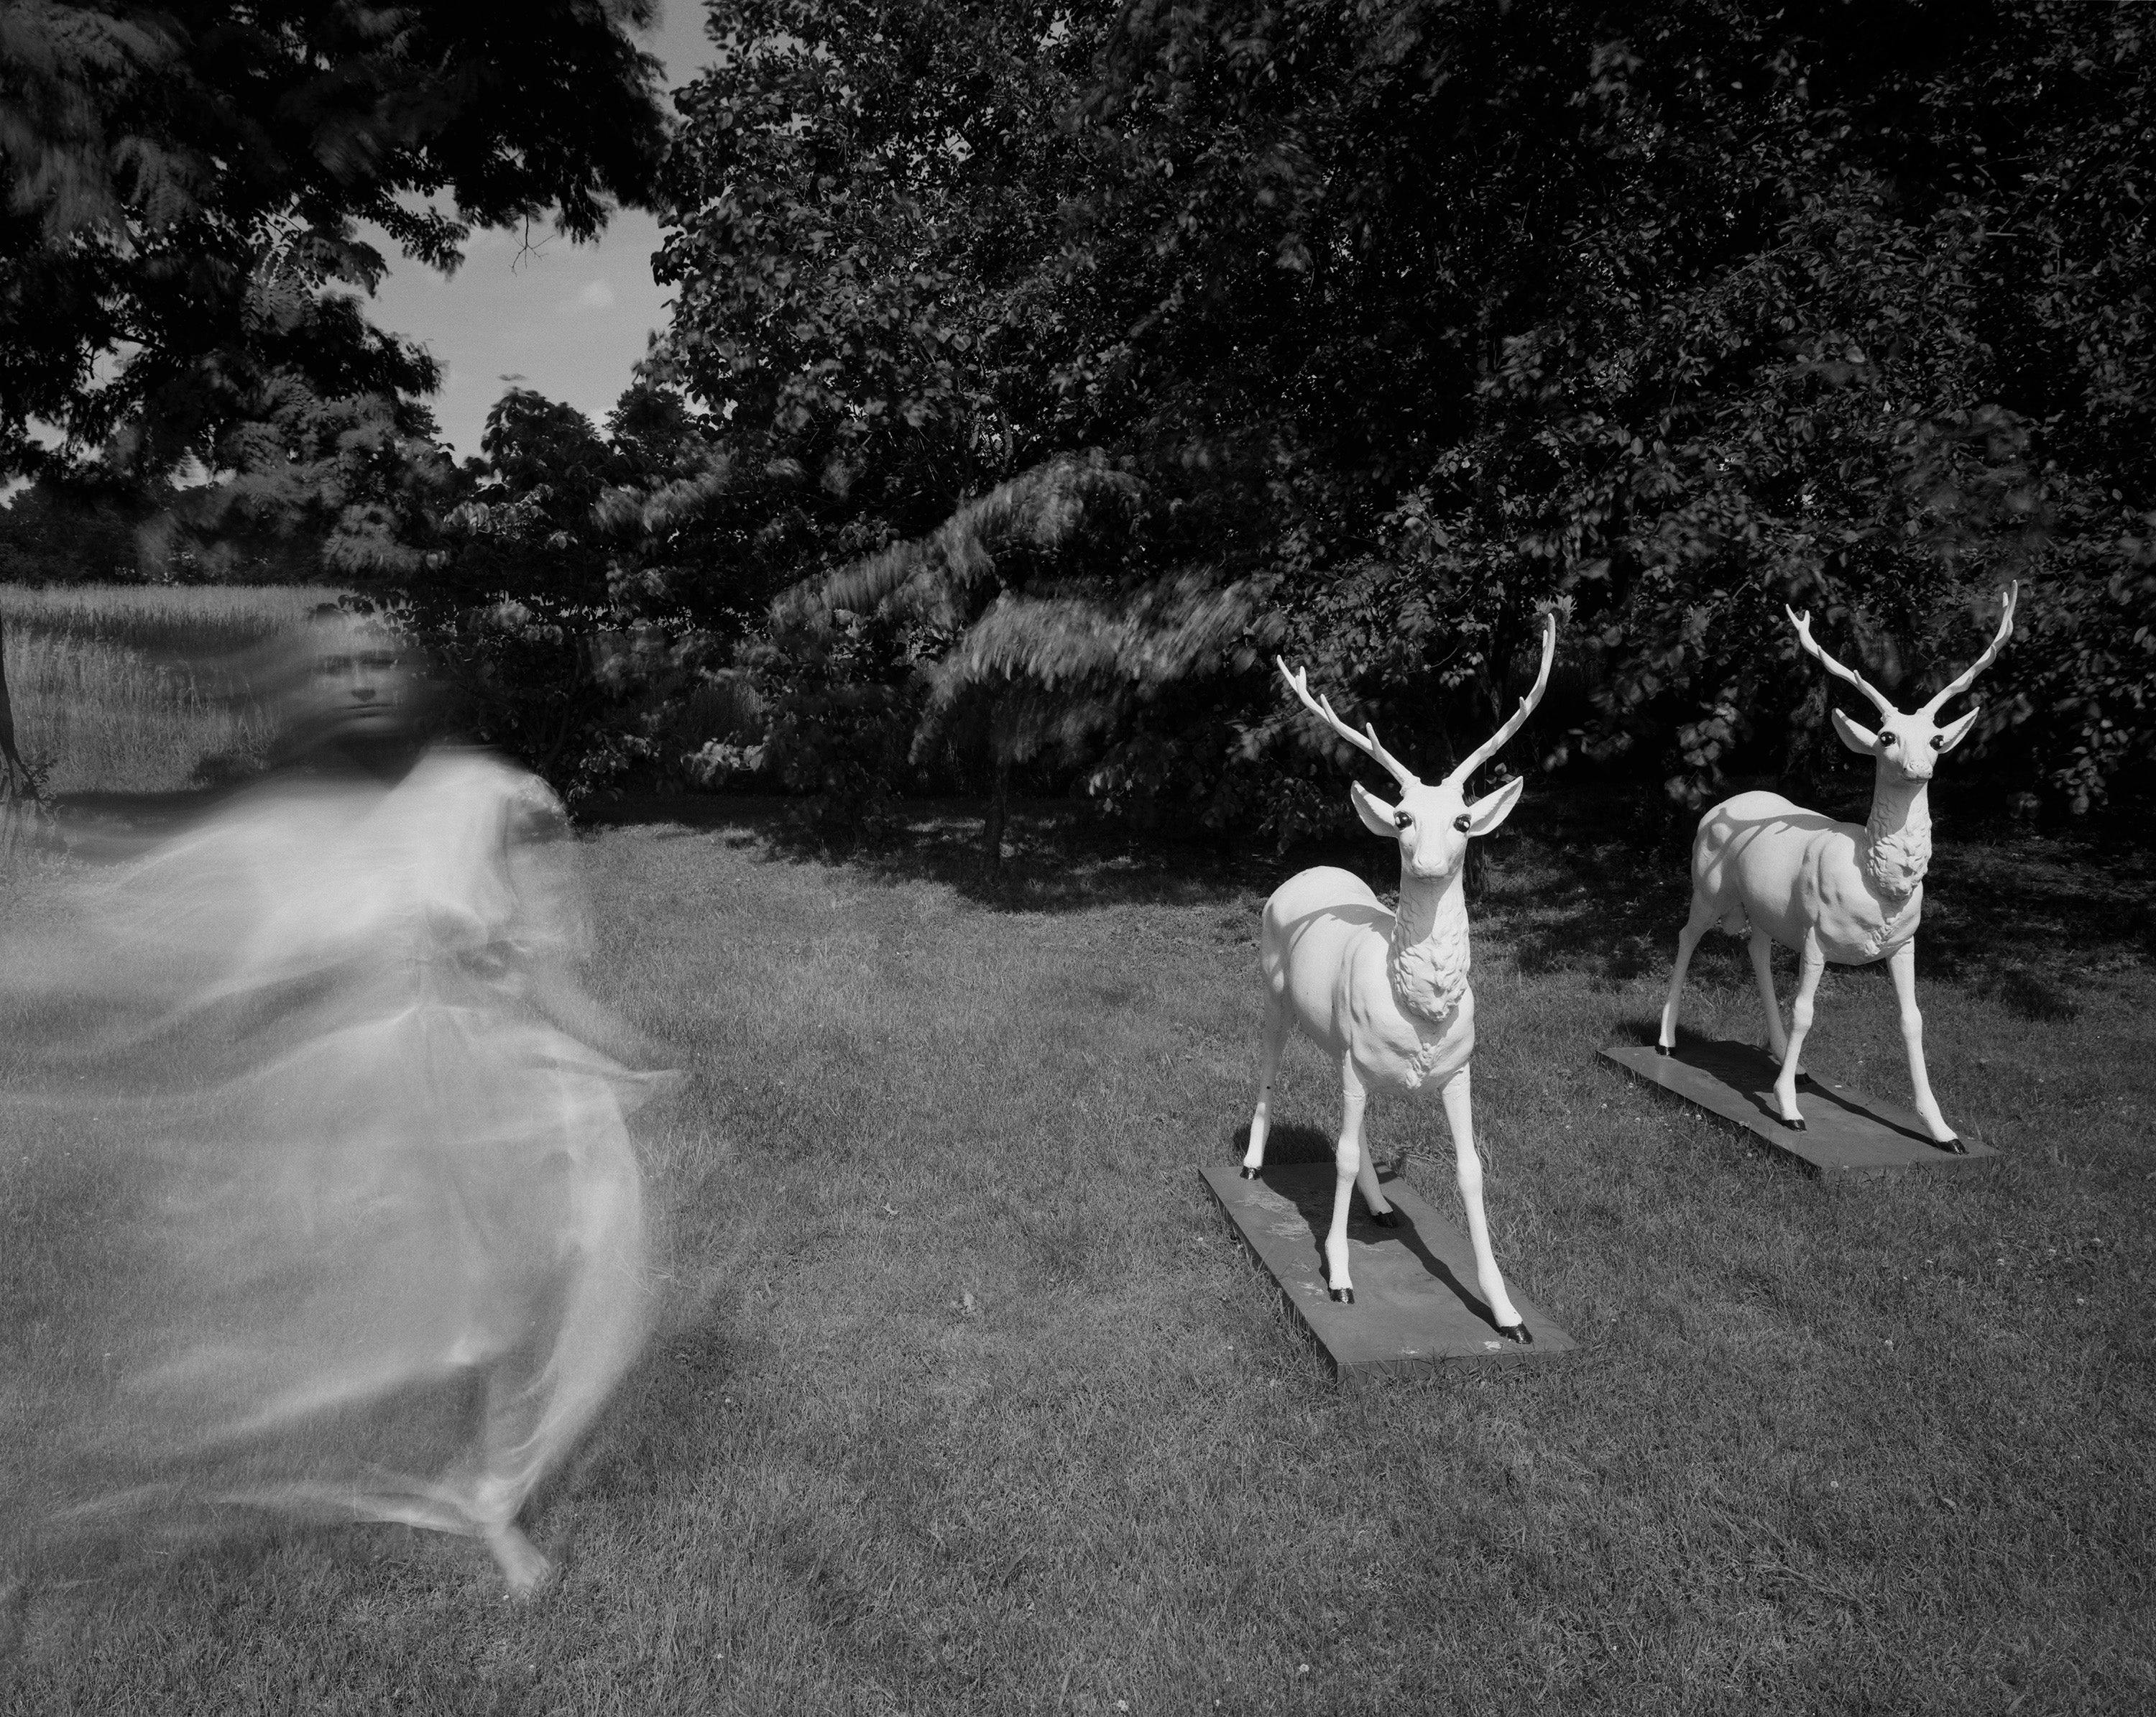 Photography by Michael Northrup titled "Yardeer".